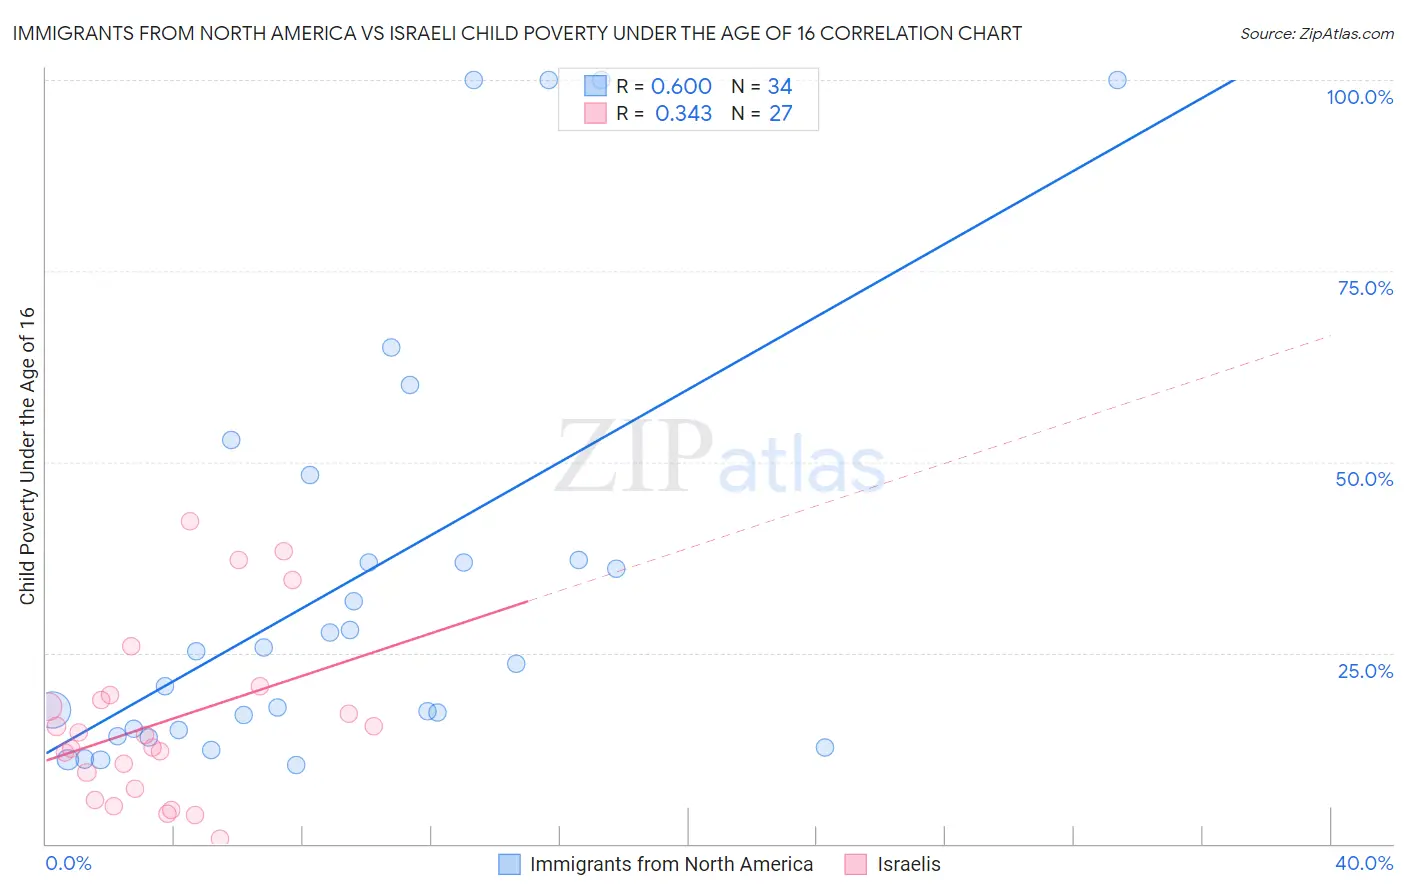 Immigrants from North America vs Israeli Child Poverty Under the Age of 16